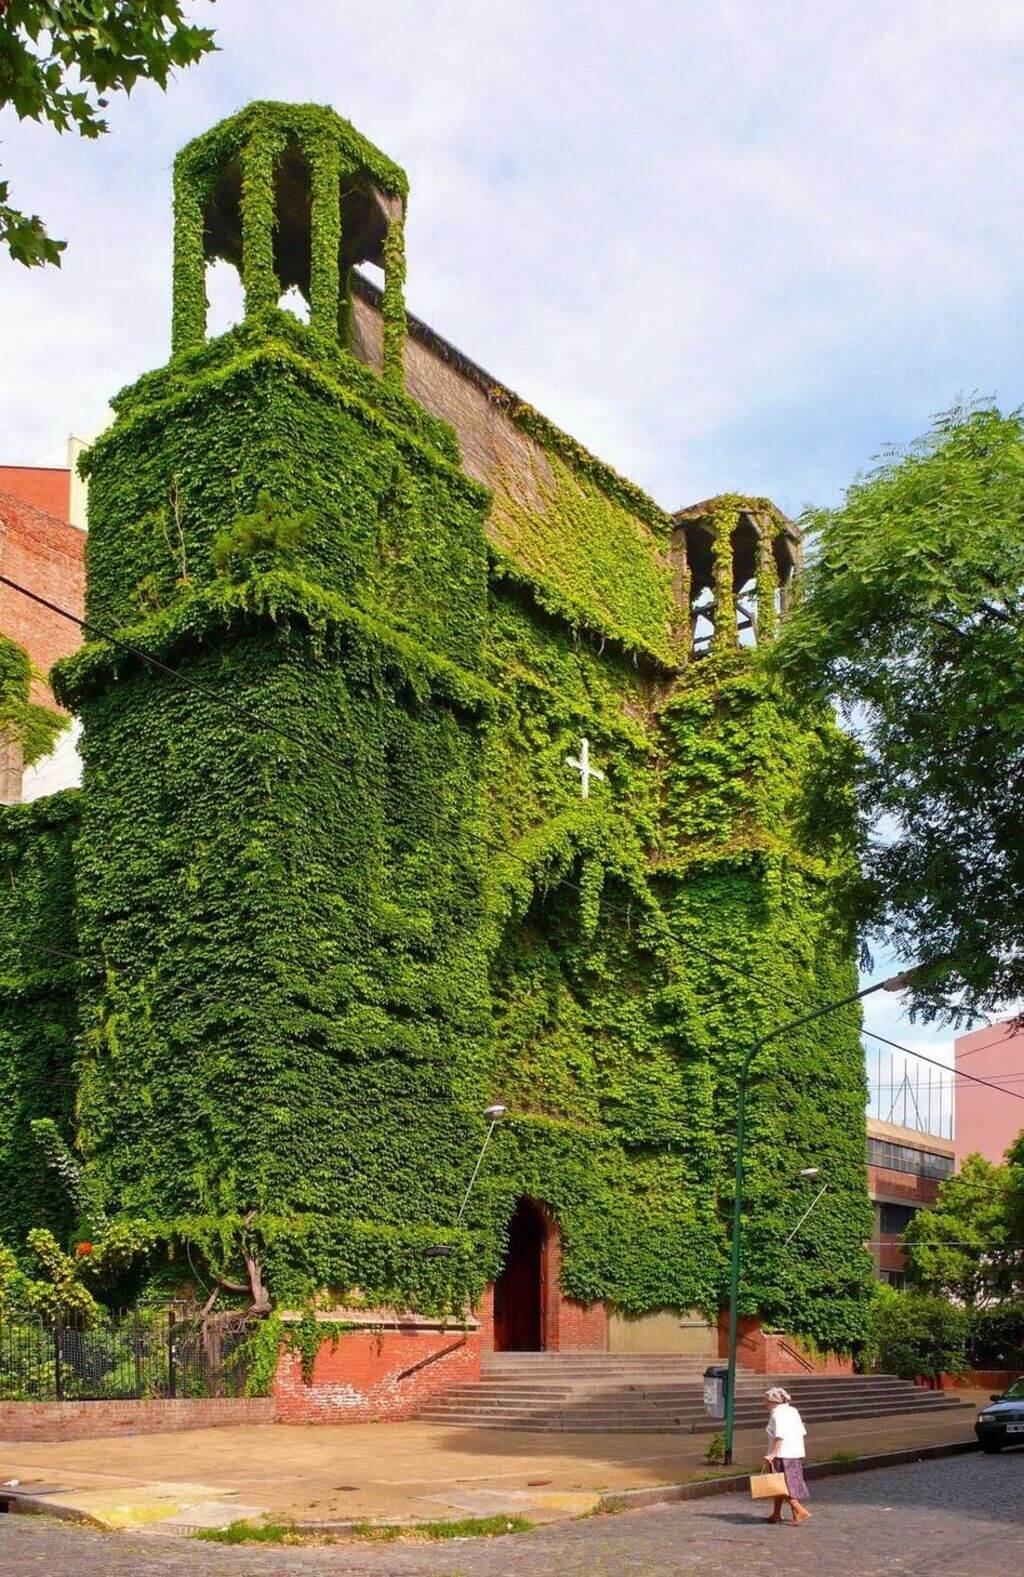  The Green Church (Buenos Aires, Argentina)